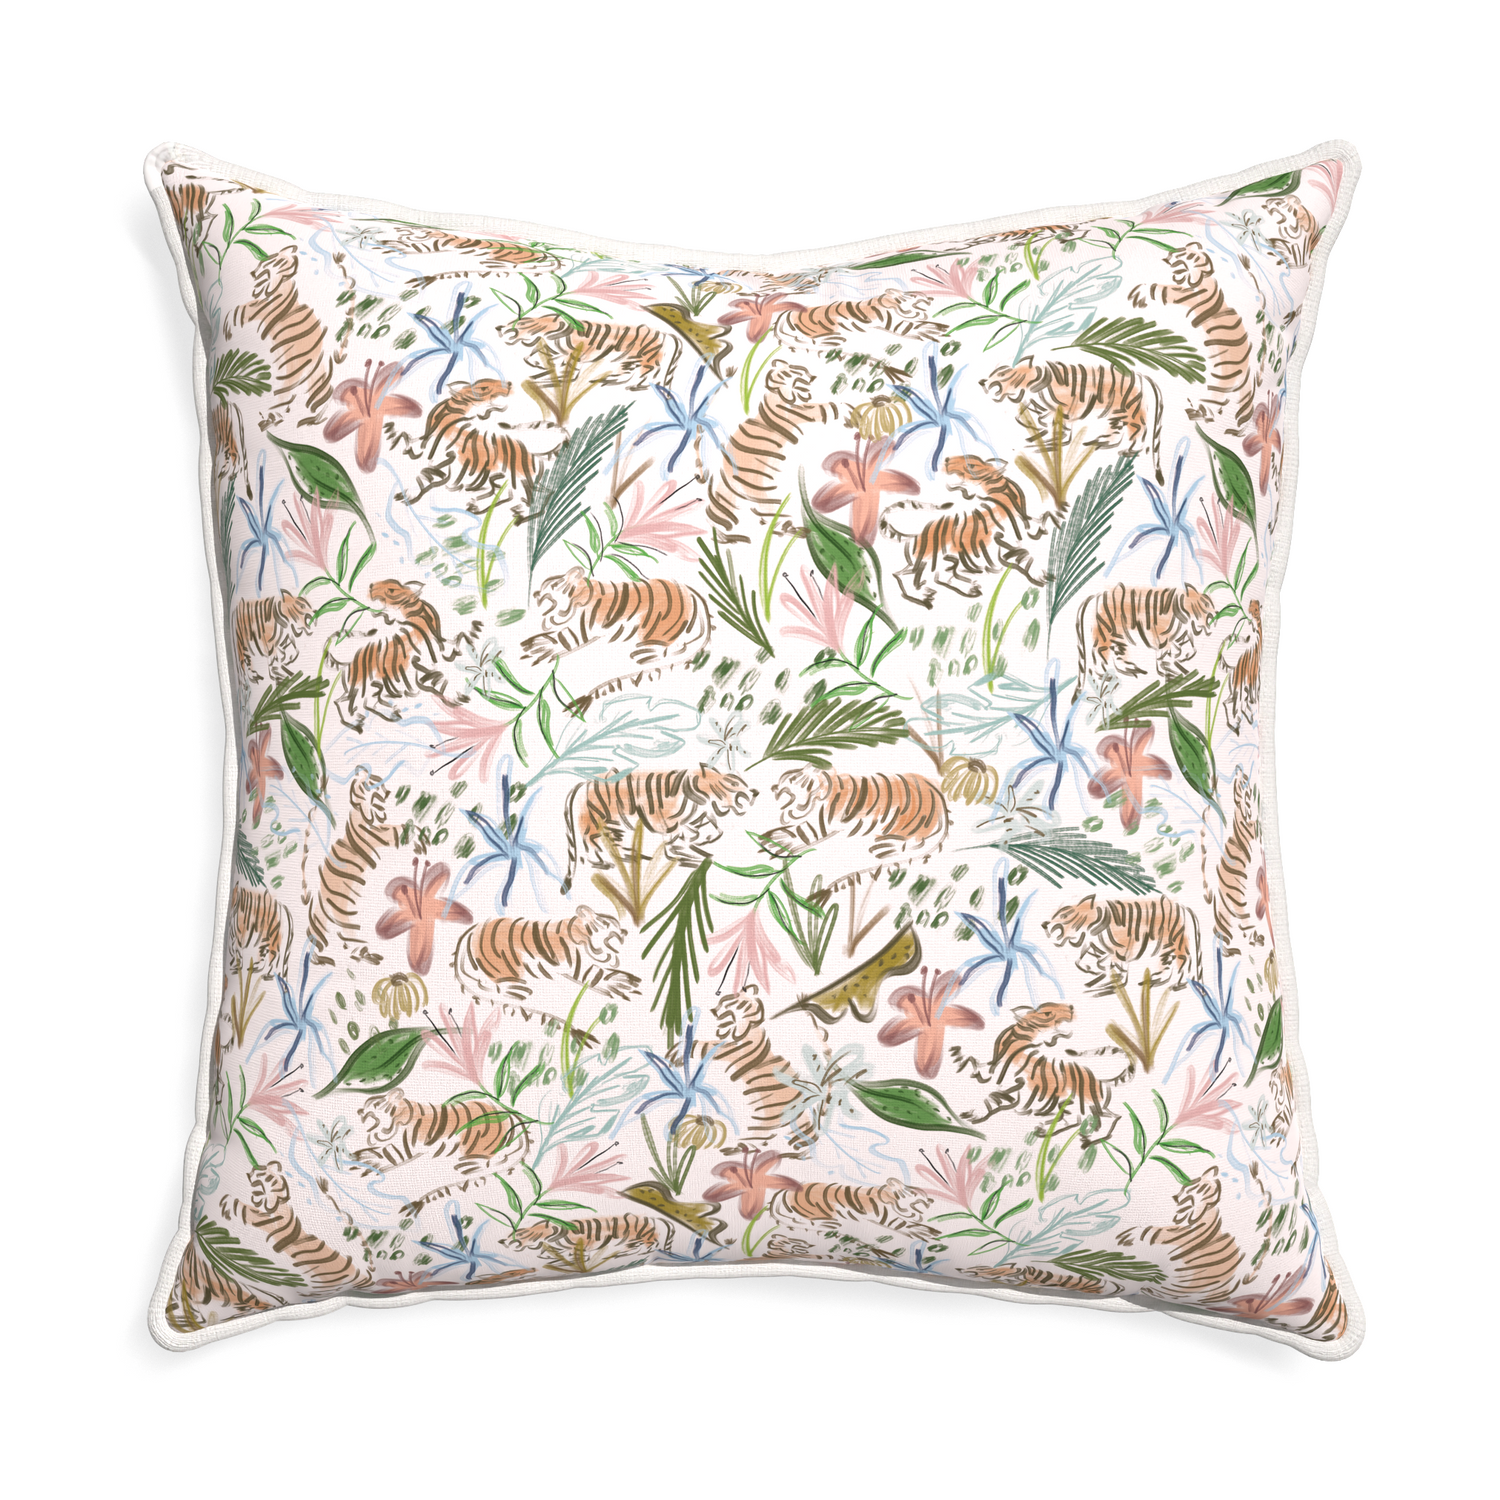 Euro-sham frida pink custom pink chinoiserie tigerpillow with snow piping on white background